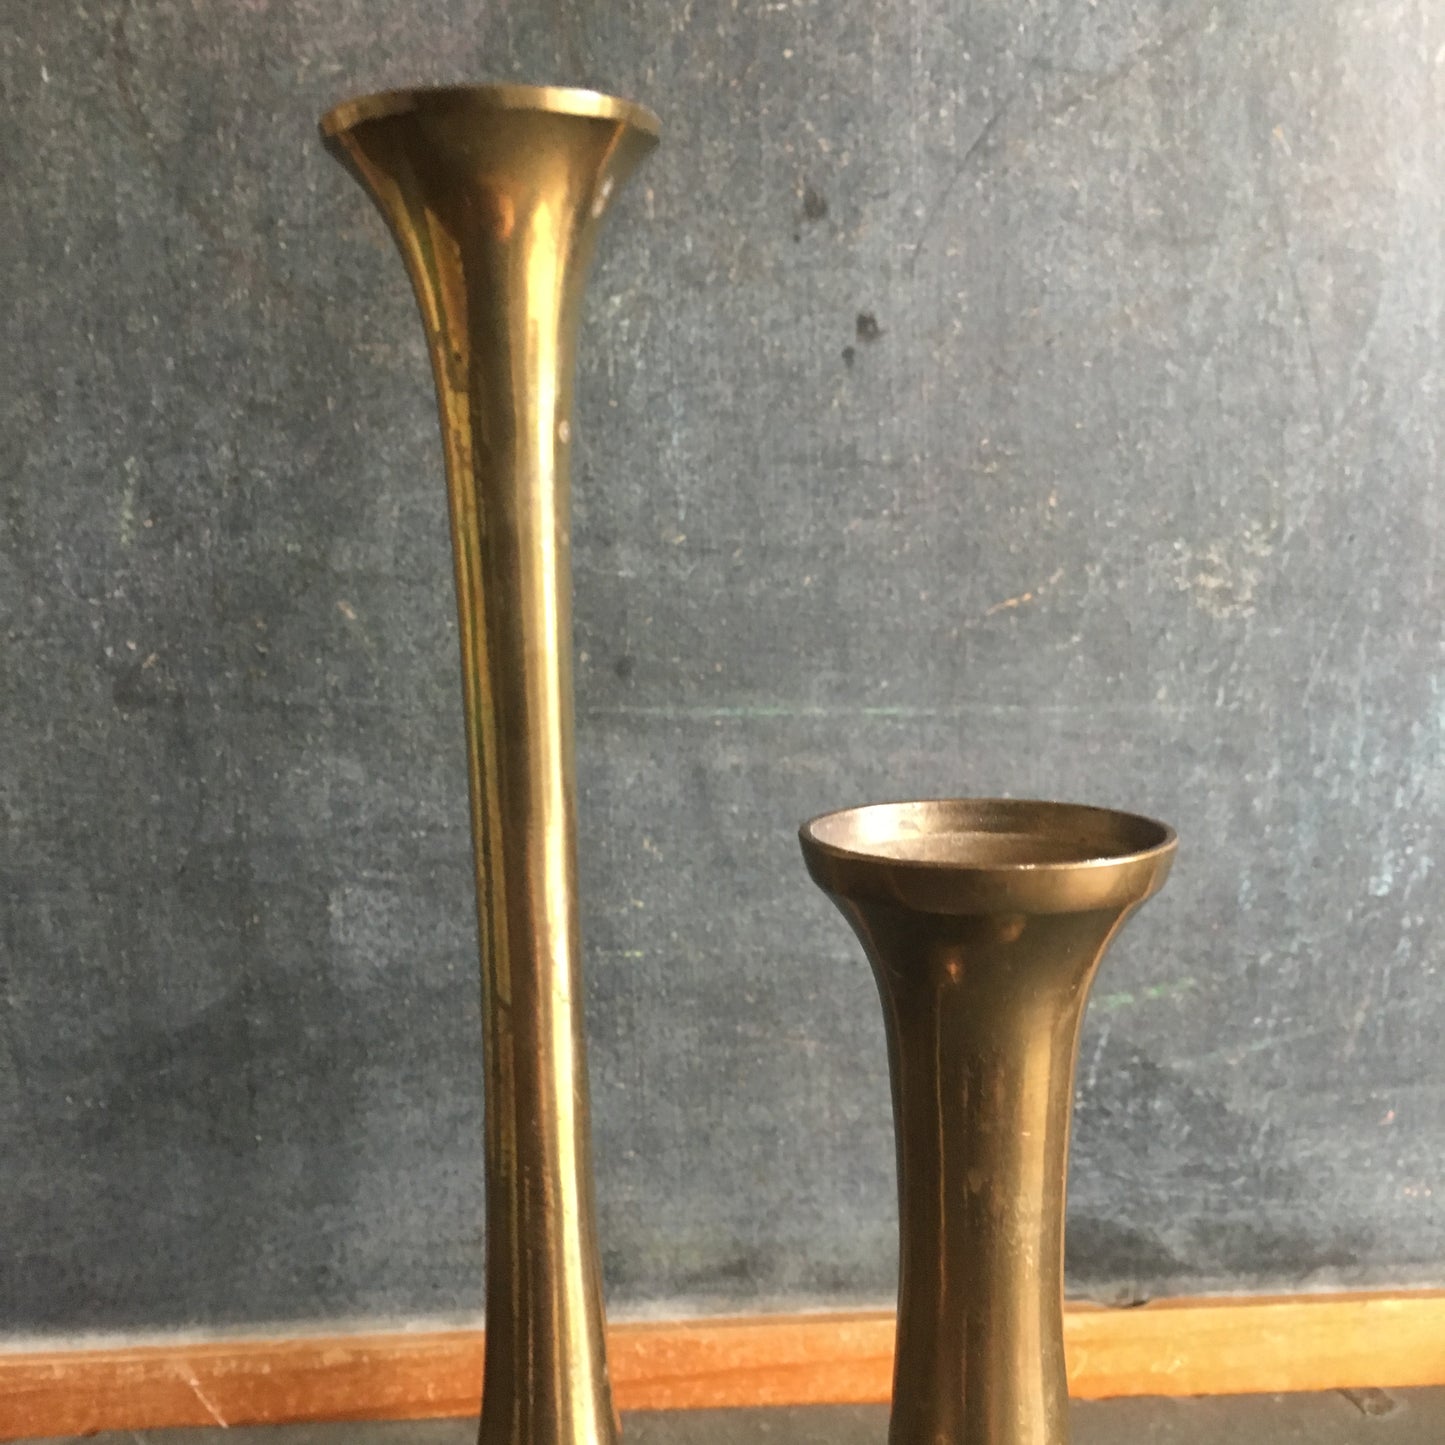 Vintage Brass Vases, Pair of Two in Antiqued Brass